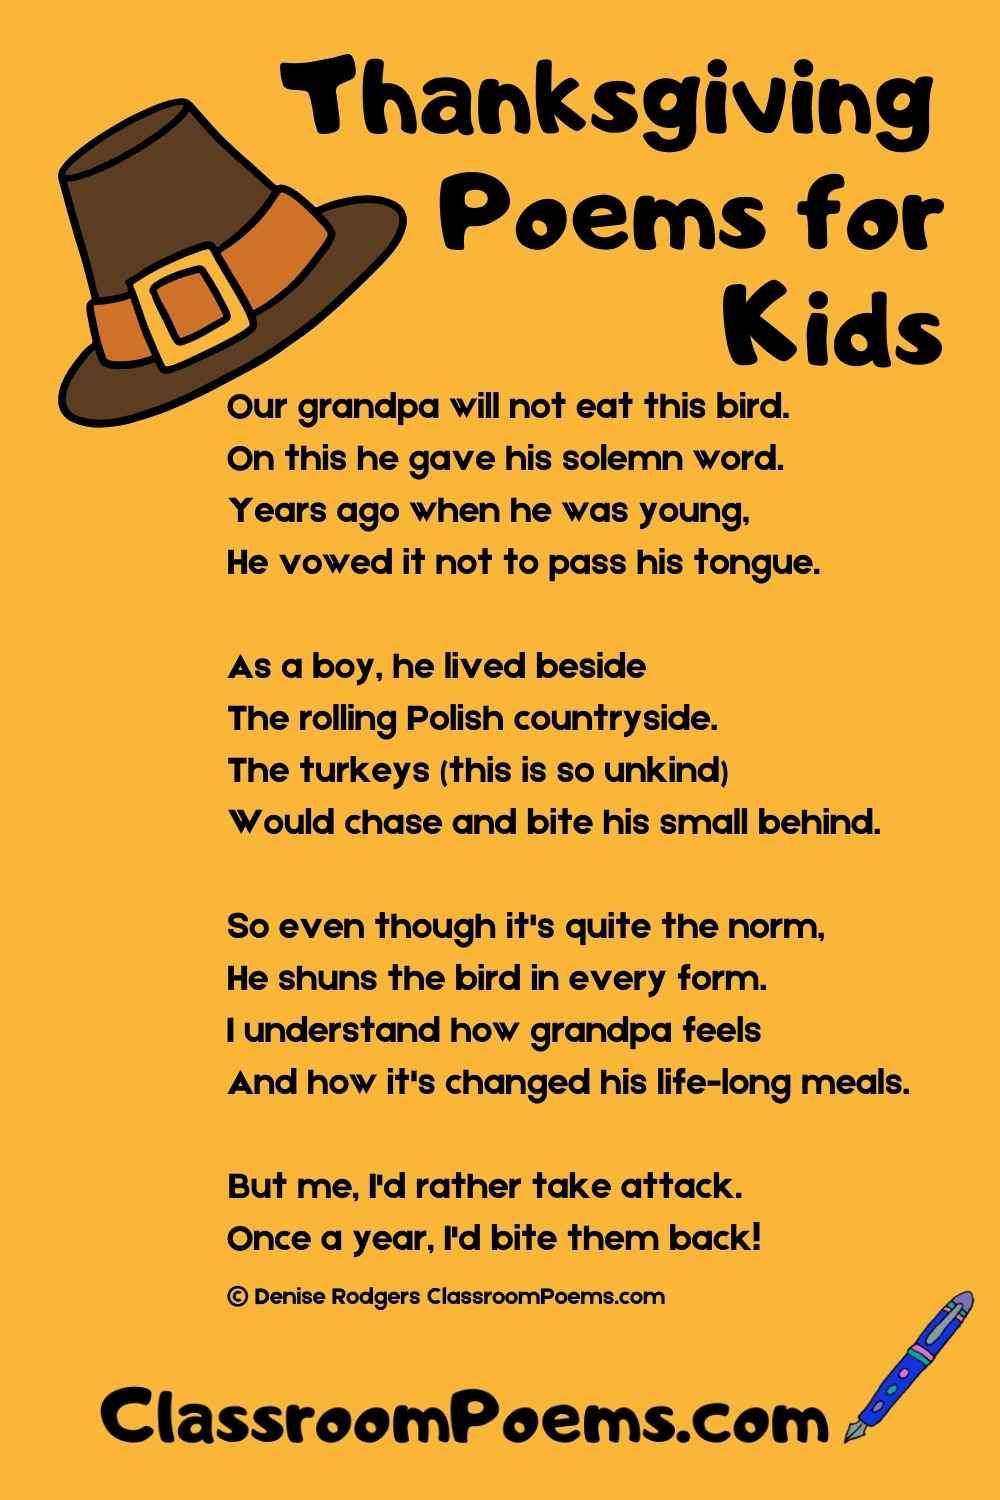 Funny Thanksgiving poem by Denise Rodgers on ClassroomPoems.com.